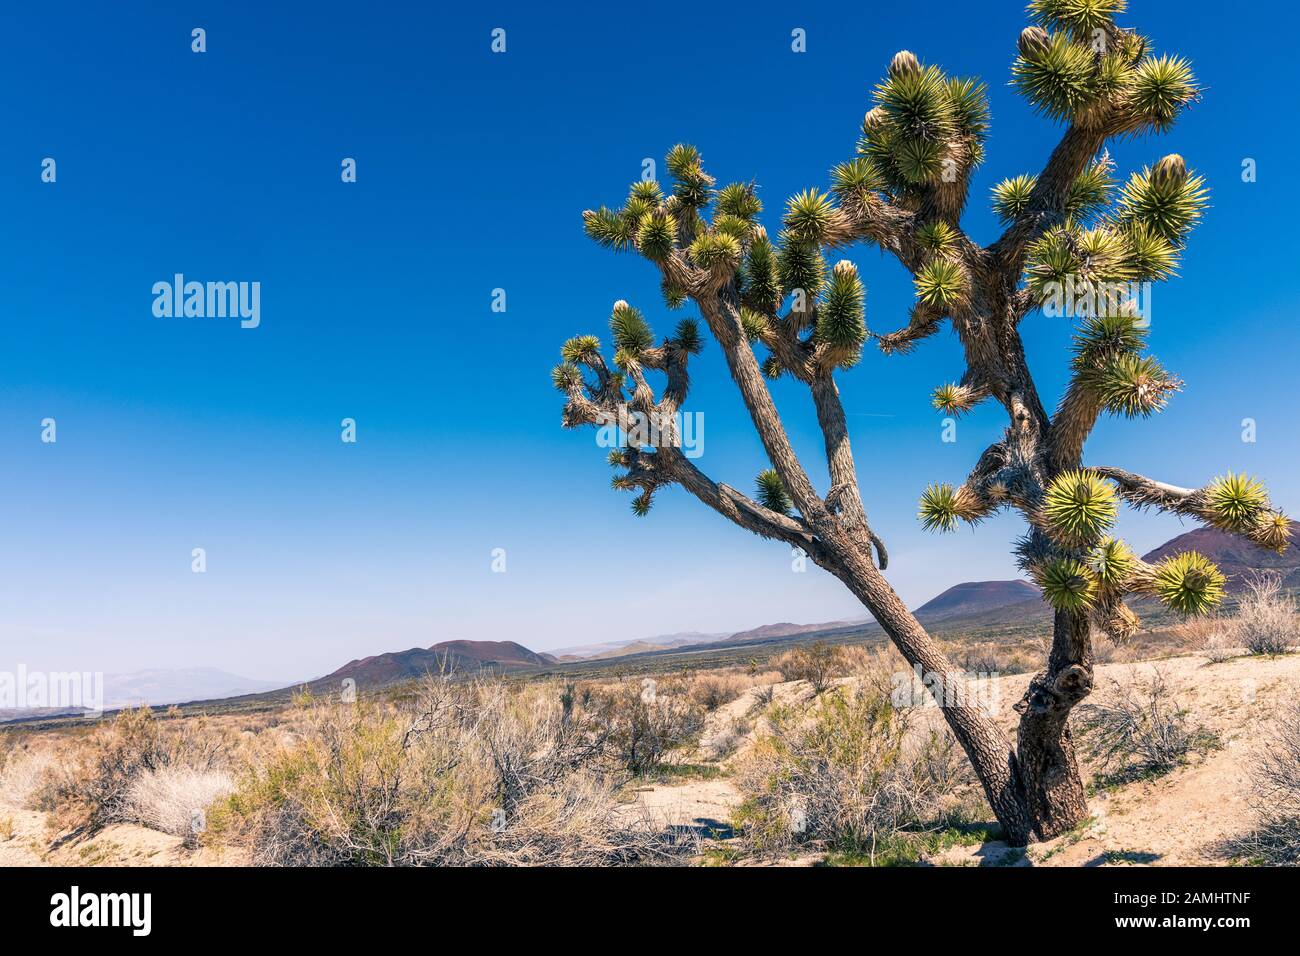 Desert view with  yucca tree in foreground Stock Photo